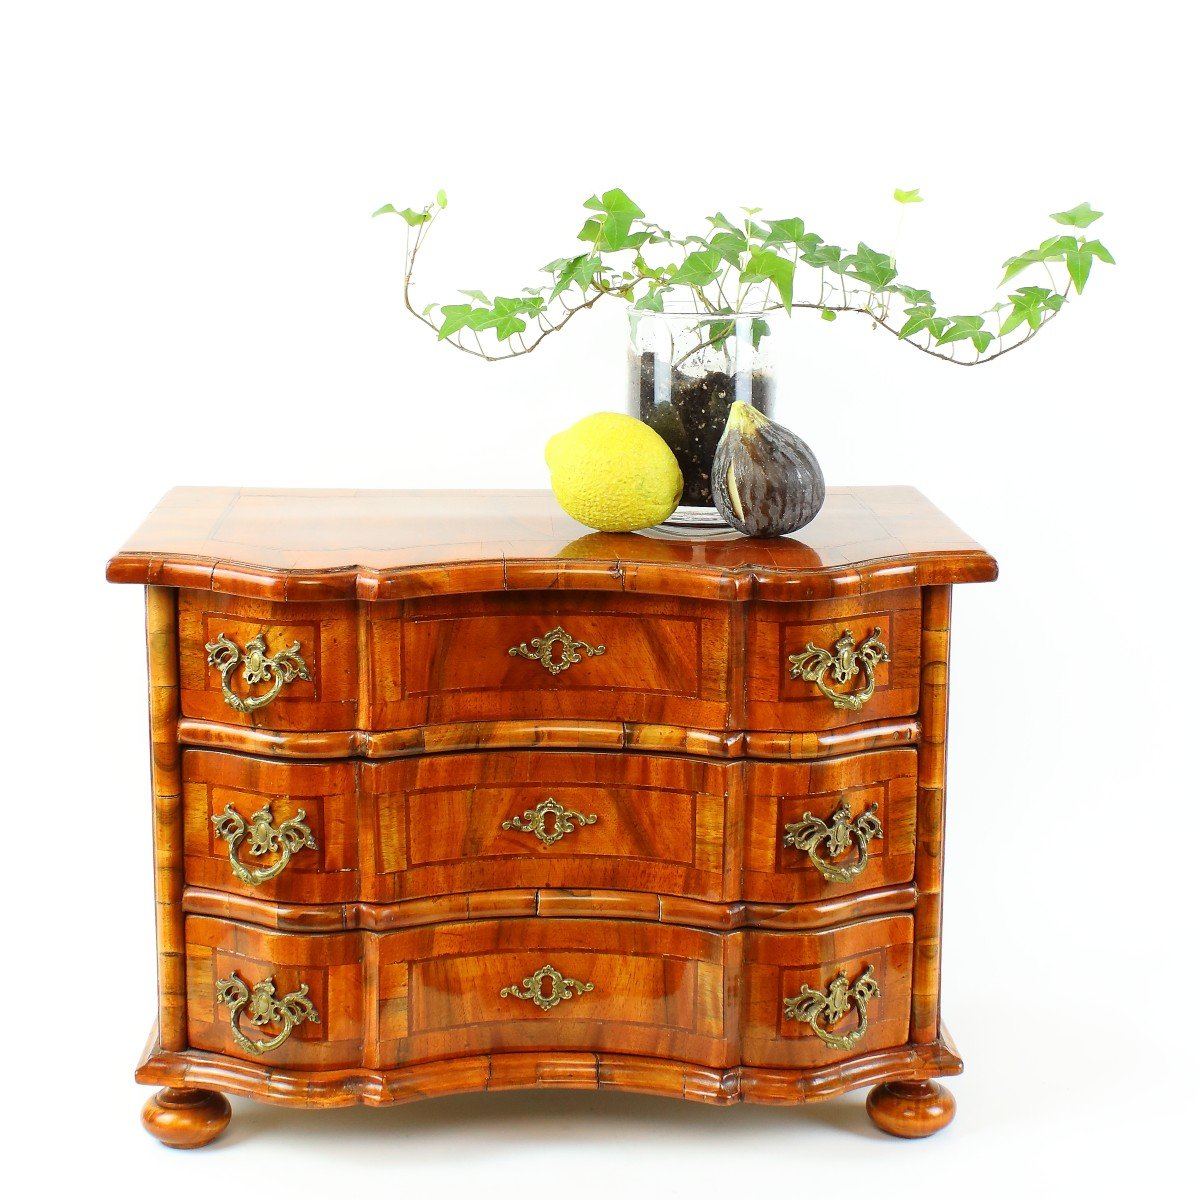 German Saxonian Baroque Style Miniature Walnut Veneer  Chest Of Drawers Or Commode